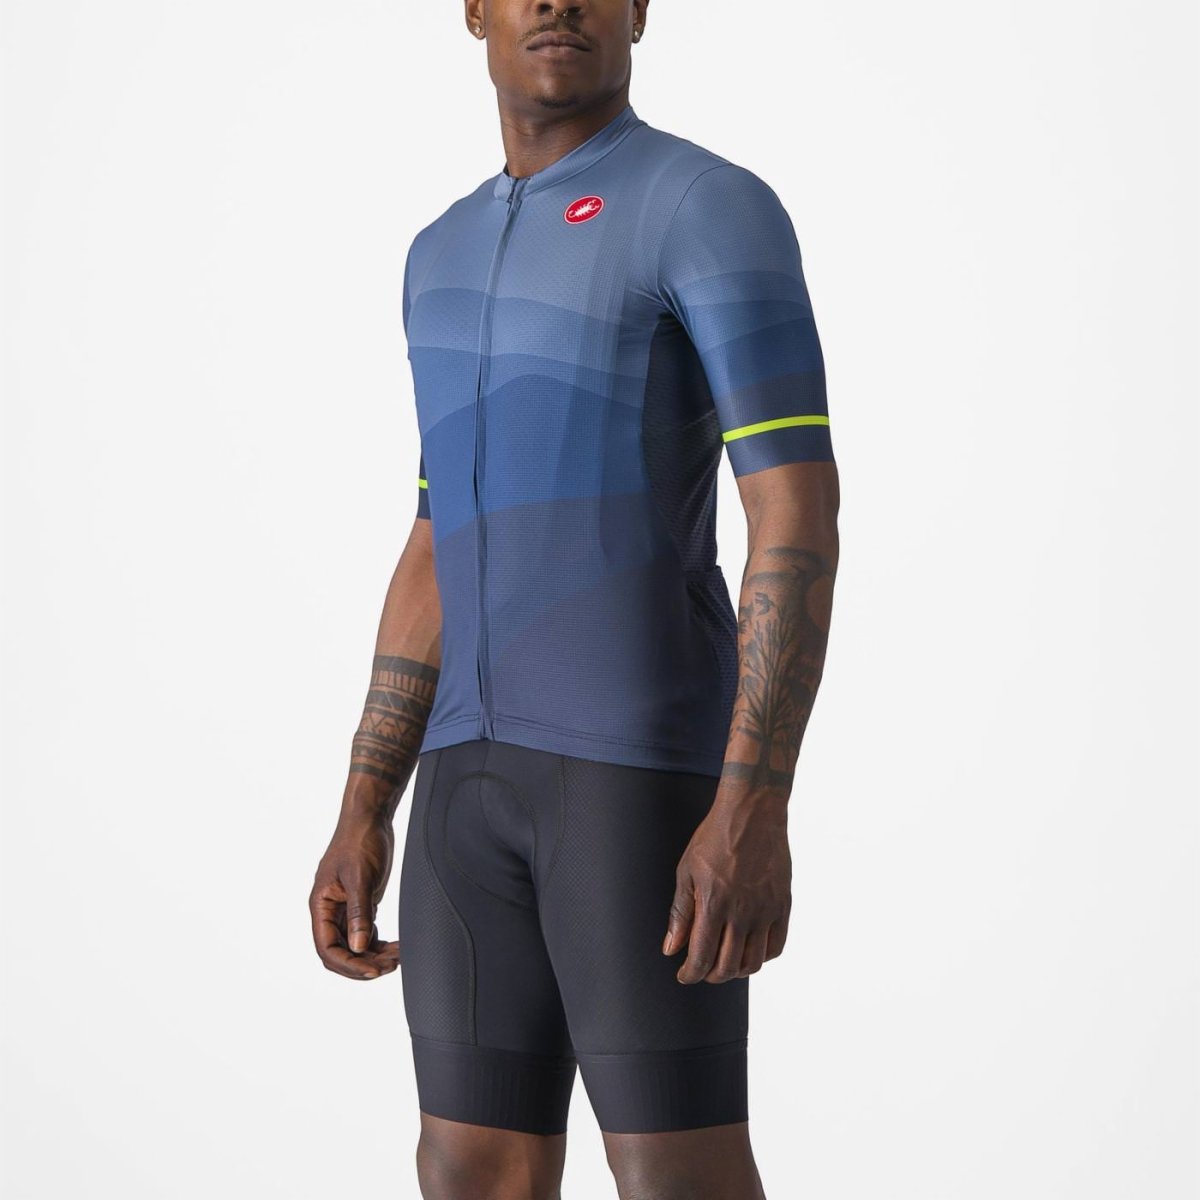 ORIZZONTE JERSEY